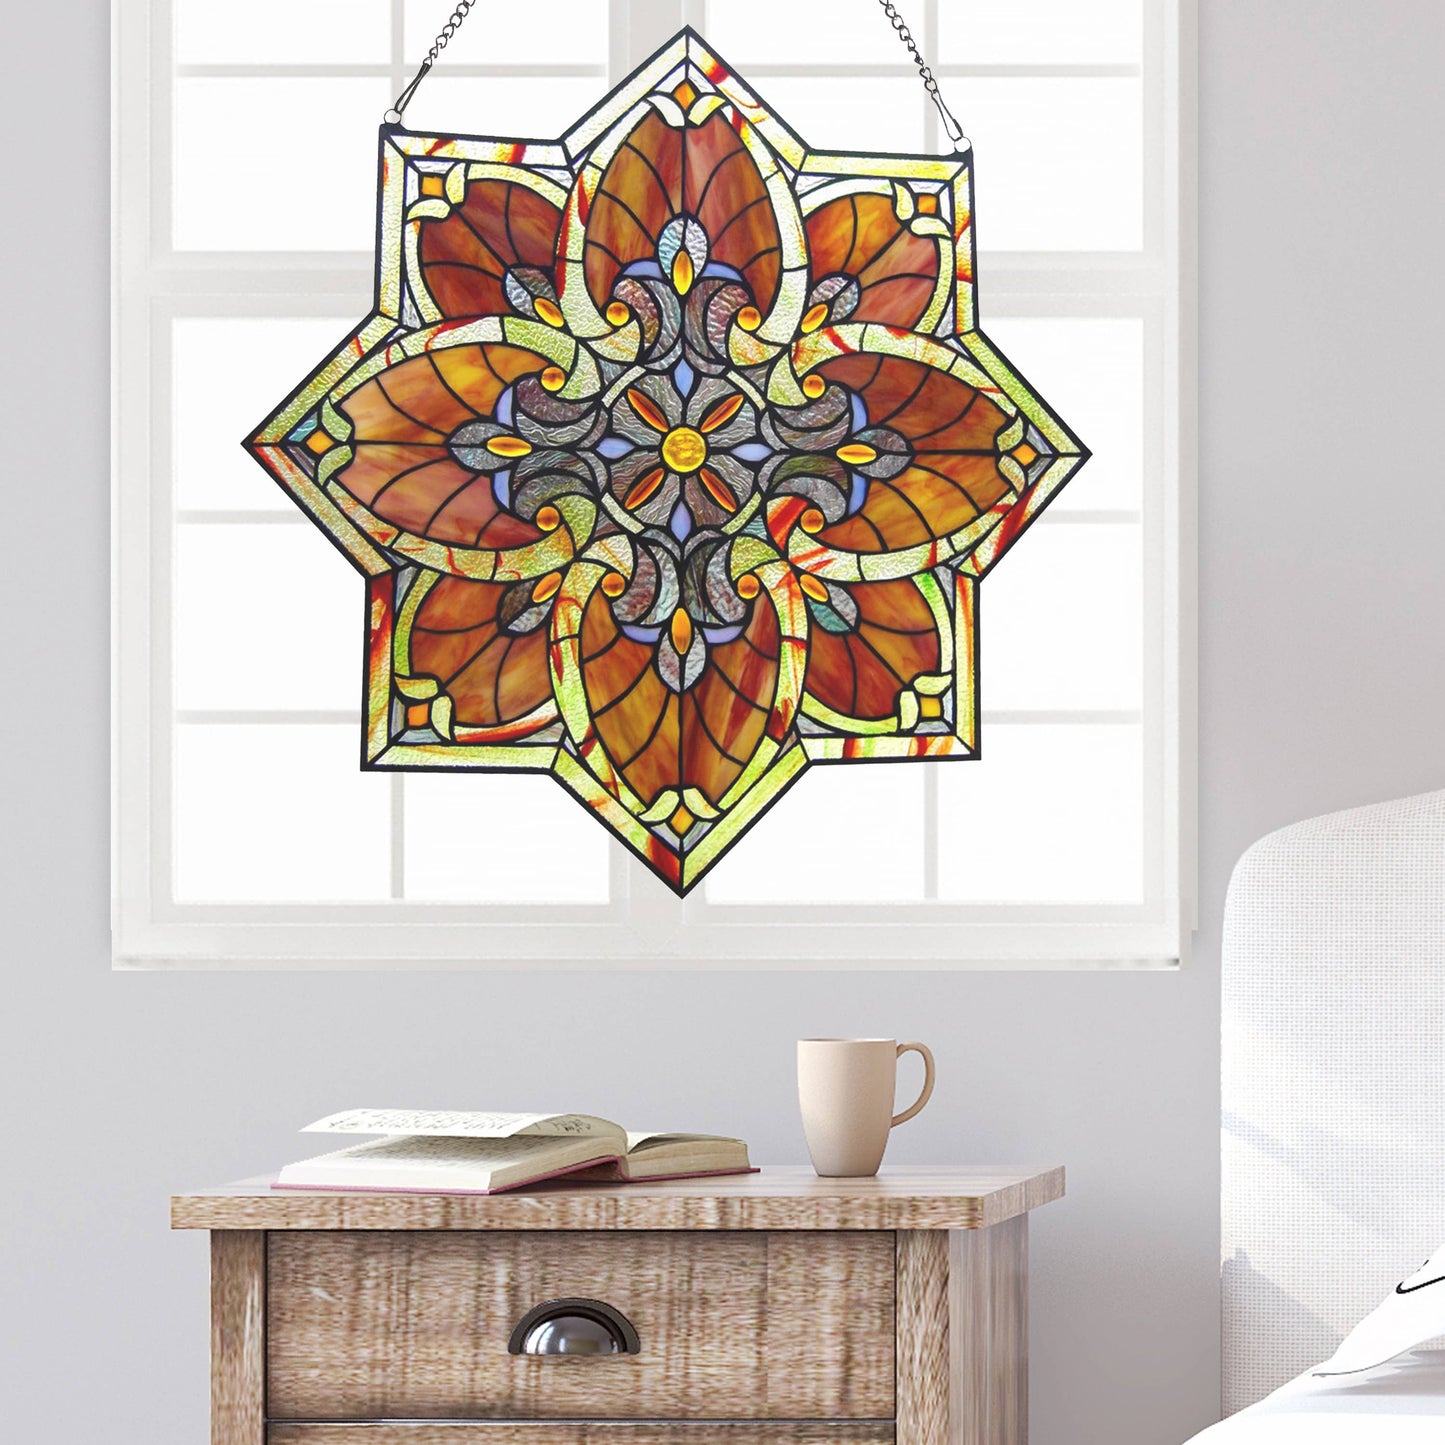 24"H Penelope Red Halston Stained Glass Window Panel